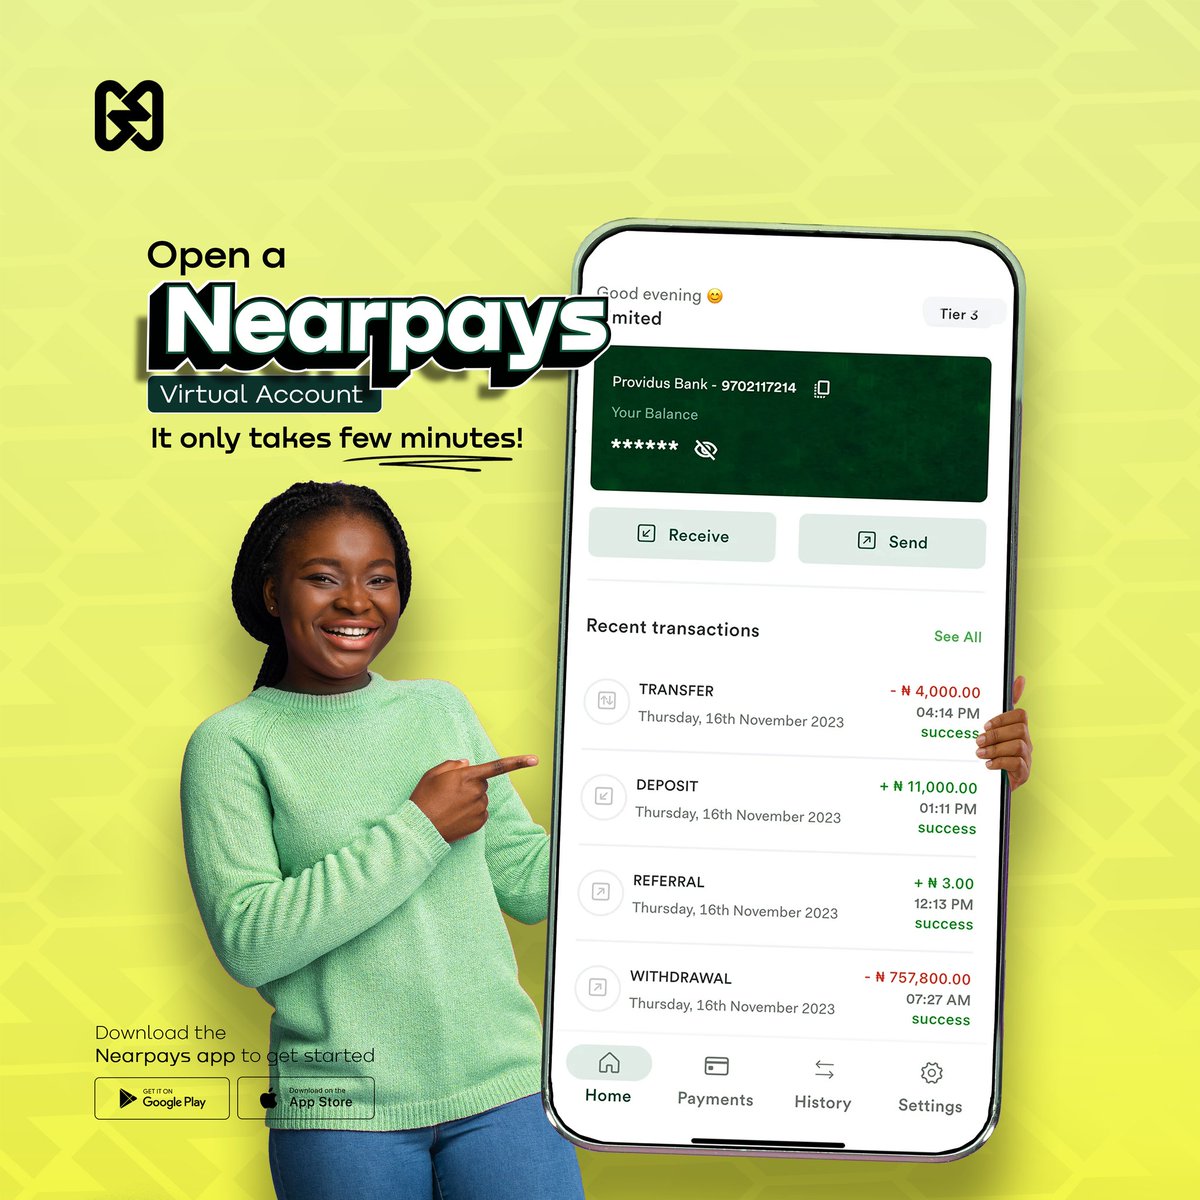 Download Nearpays to open a virtual account in few minutes. 
#Nearpays #softpos #finance #fintech #payments #virtualaccount